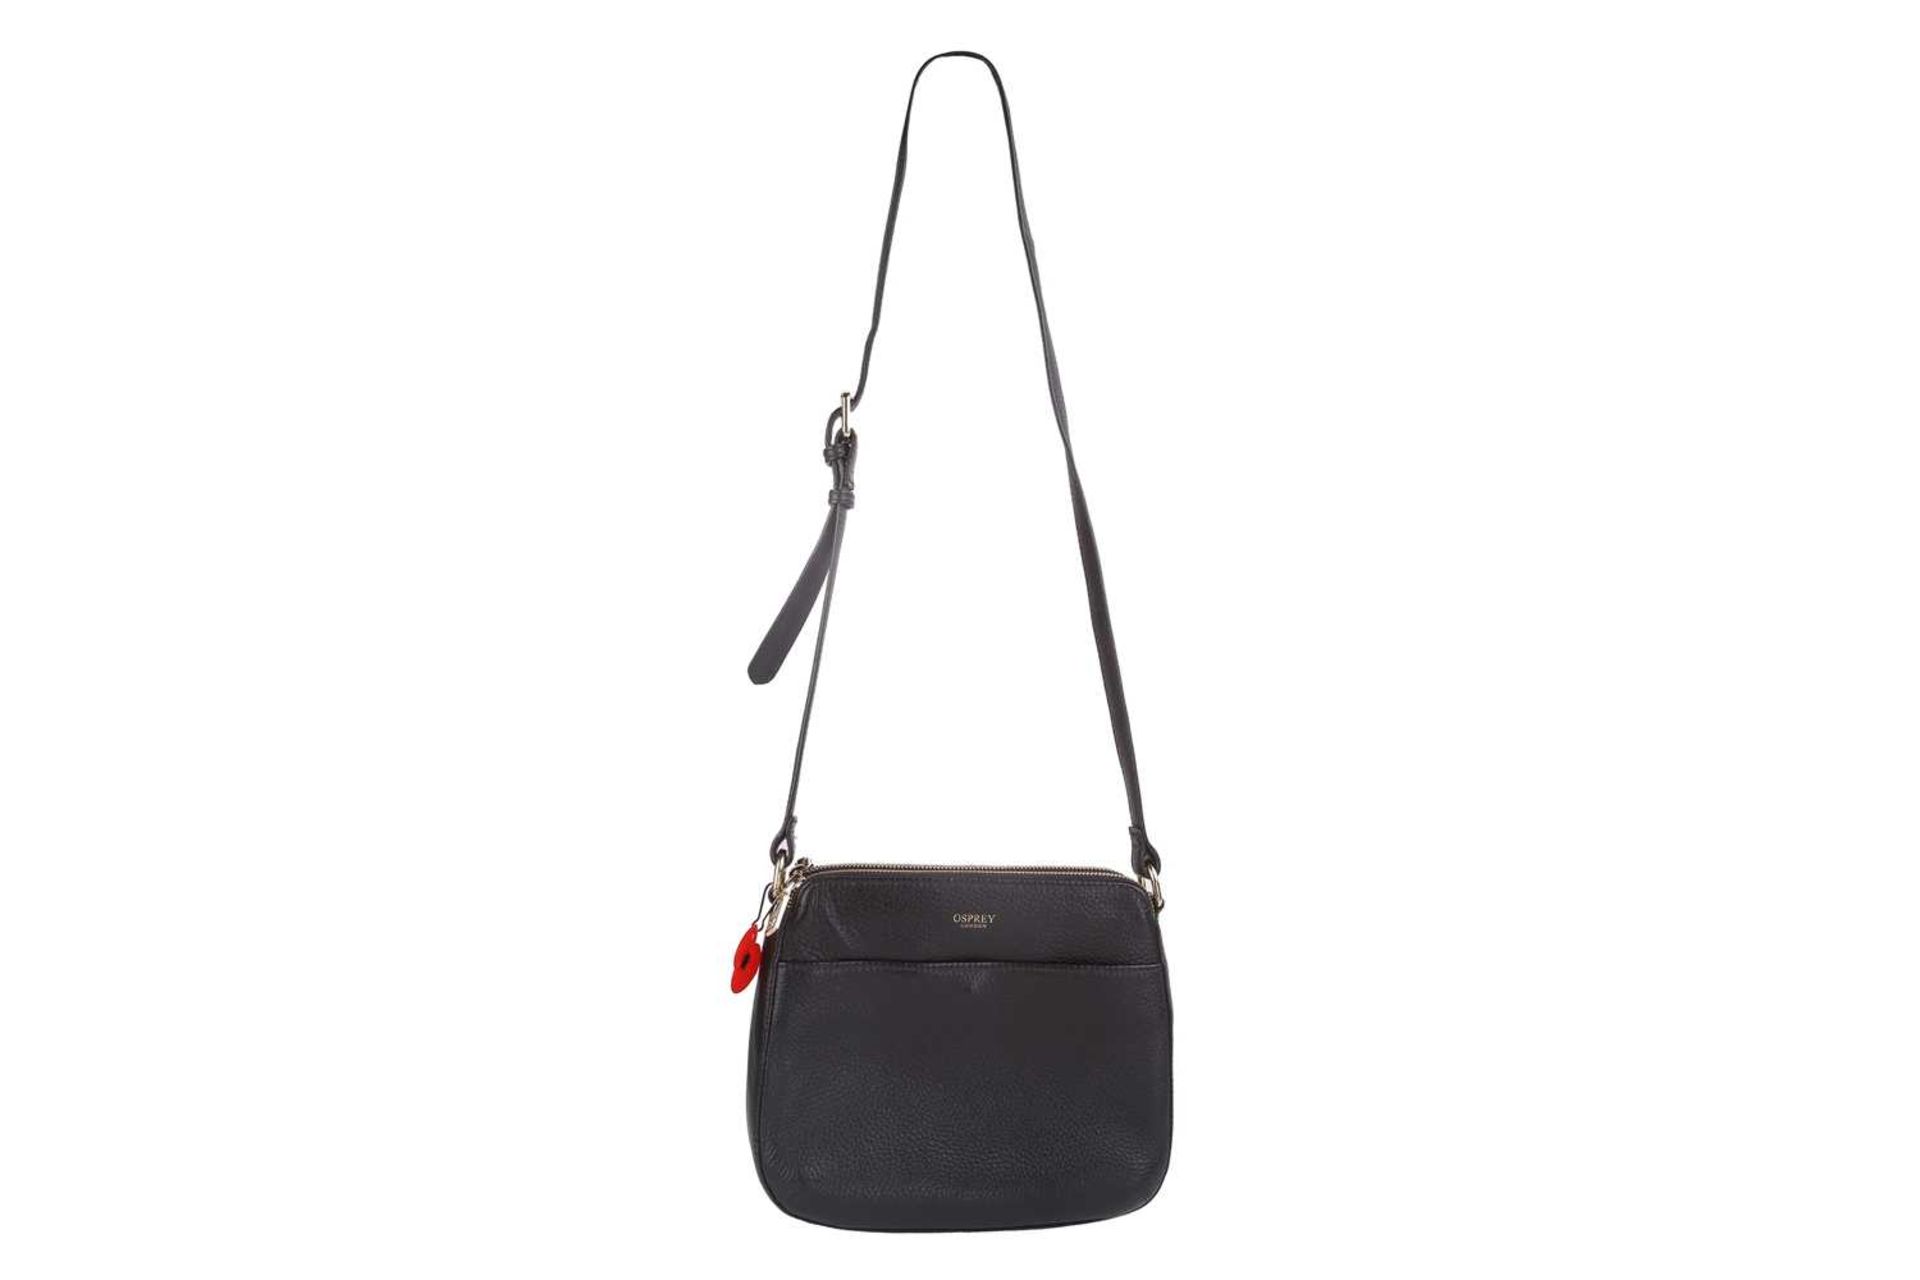 Two Osprey crossbody bags in black leather; one with top zip closure, adjustable crossbody strap, - Image 9 of 12